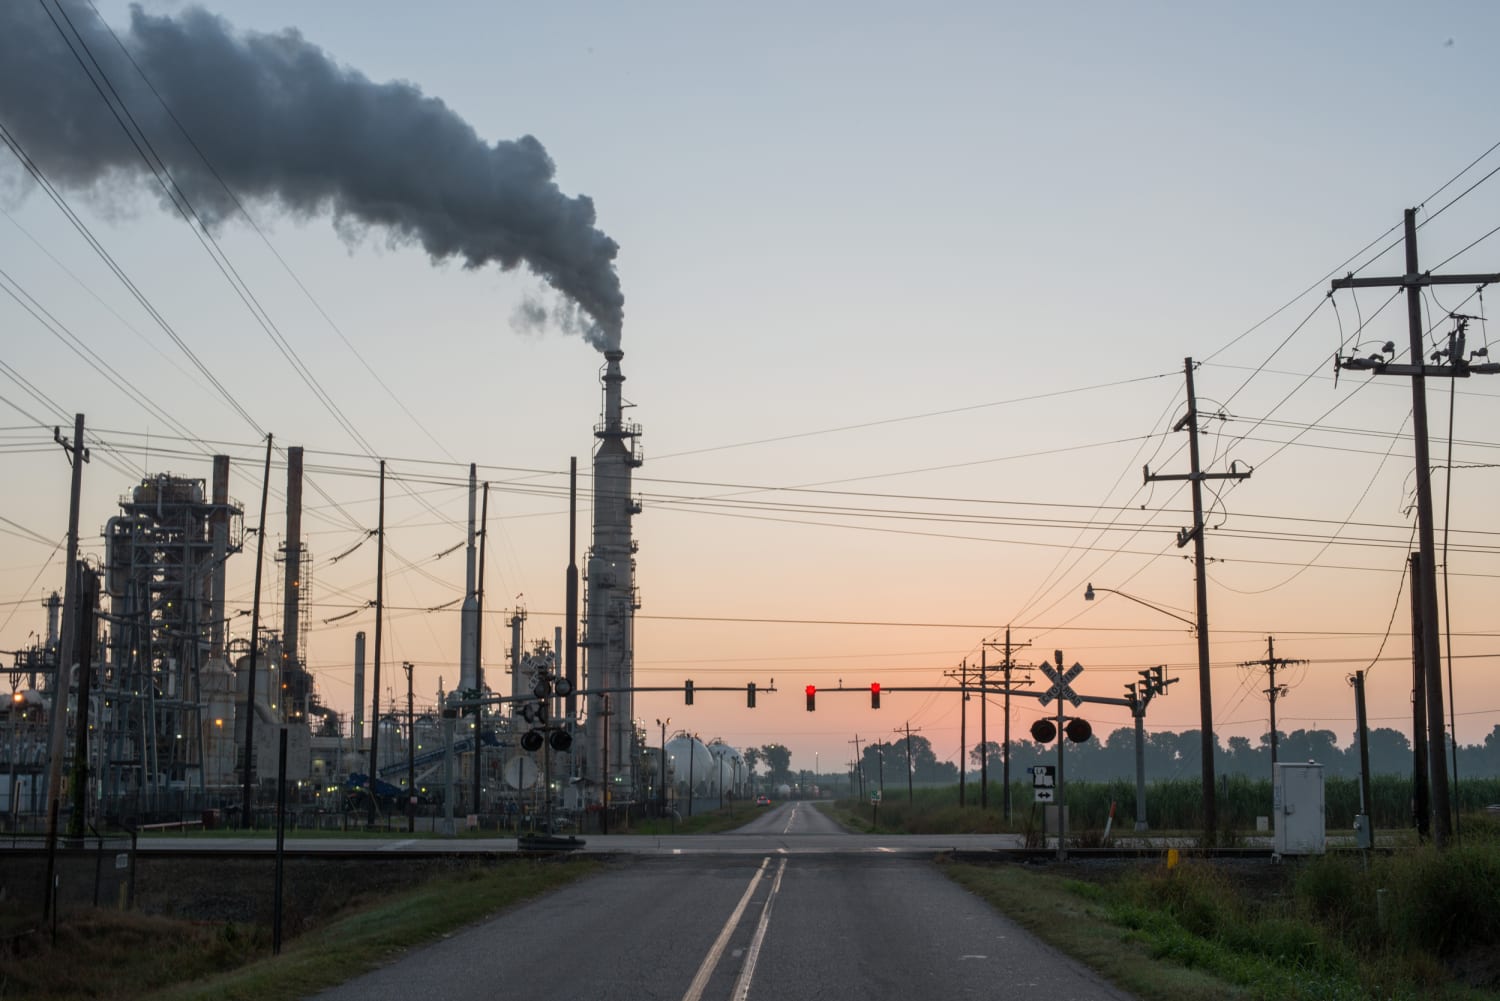 Black people over 65 far more likely to die from pollution-related disease than white seniors